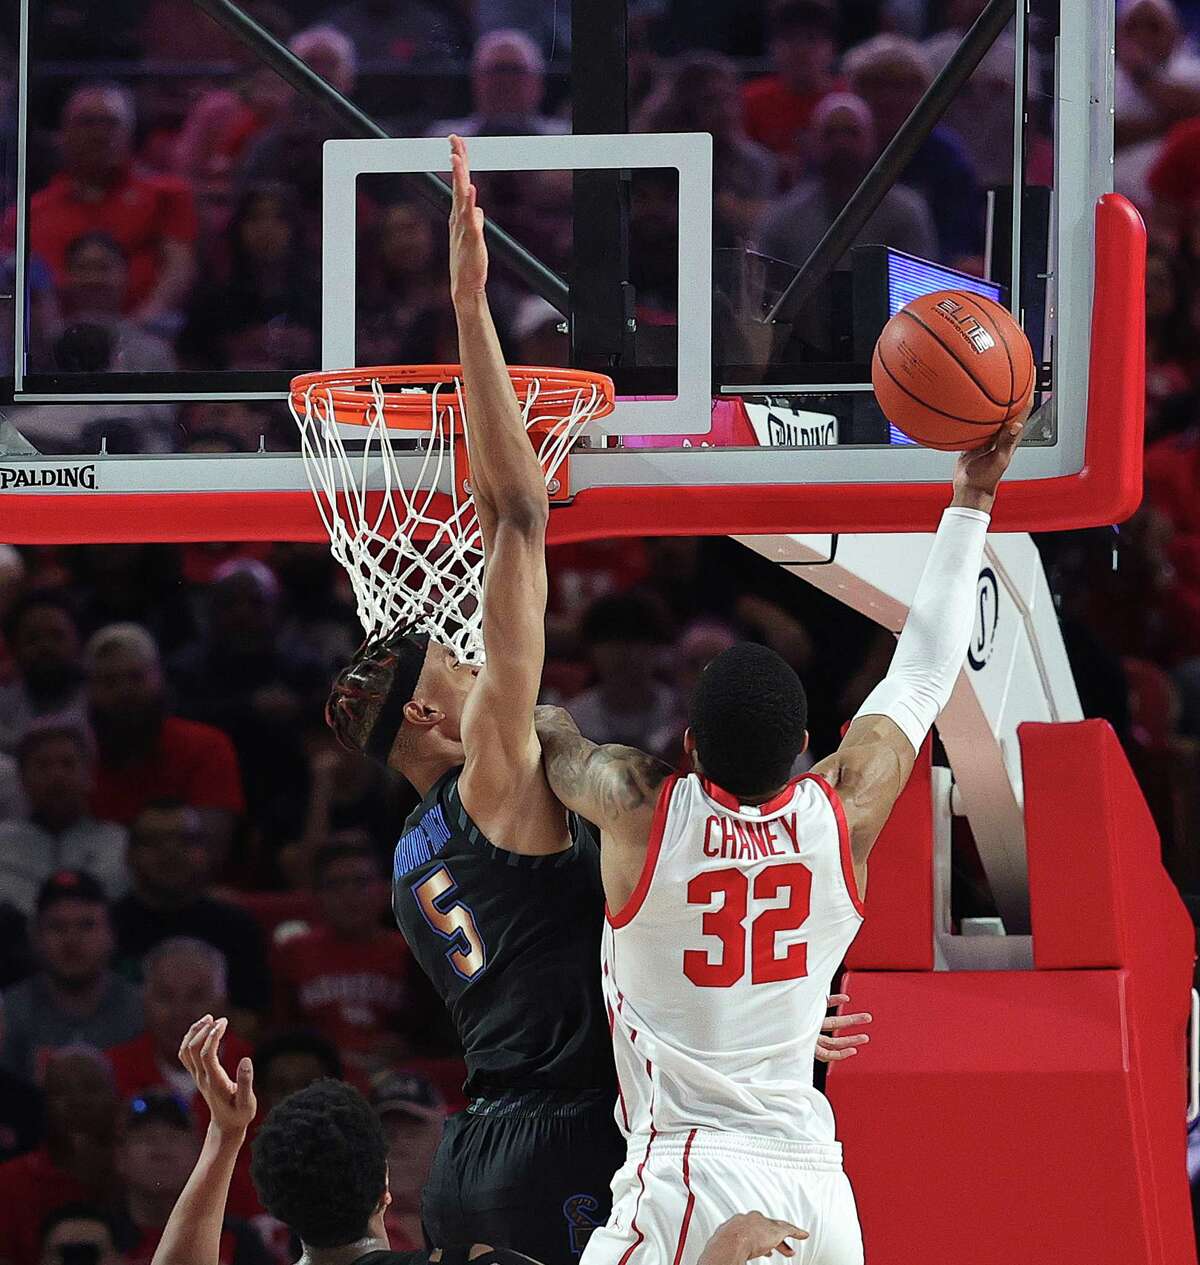 HOUSTON, TEXAS - FEBRUARY 19: Reggie Chaney #32 of the Houston Cougars drives to the basket on Kaodirichi Akobundu-Ehiogu #5 of the Memphis Tigers during the first half at Fertitta Center on February 19, 2023 in Houston, Texas.